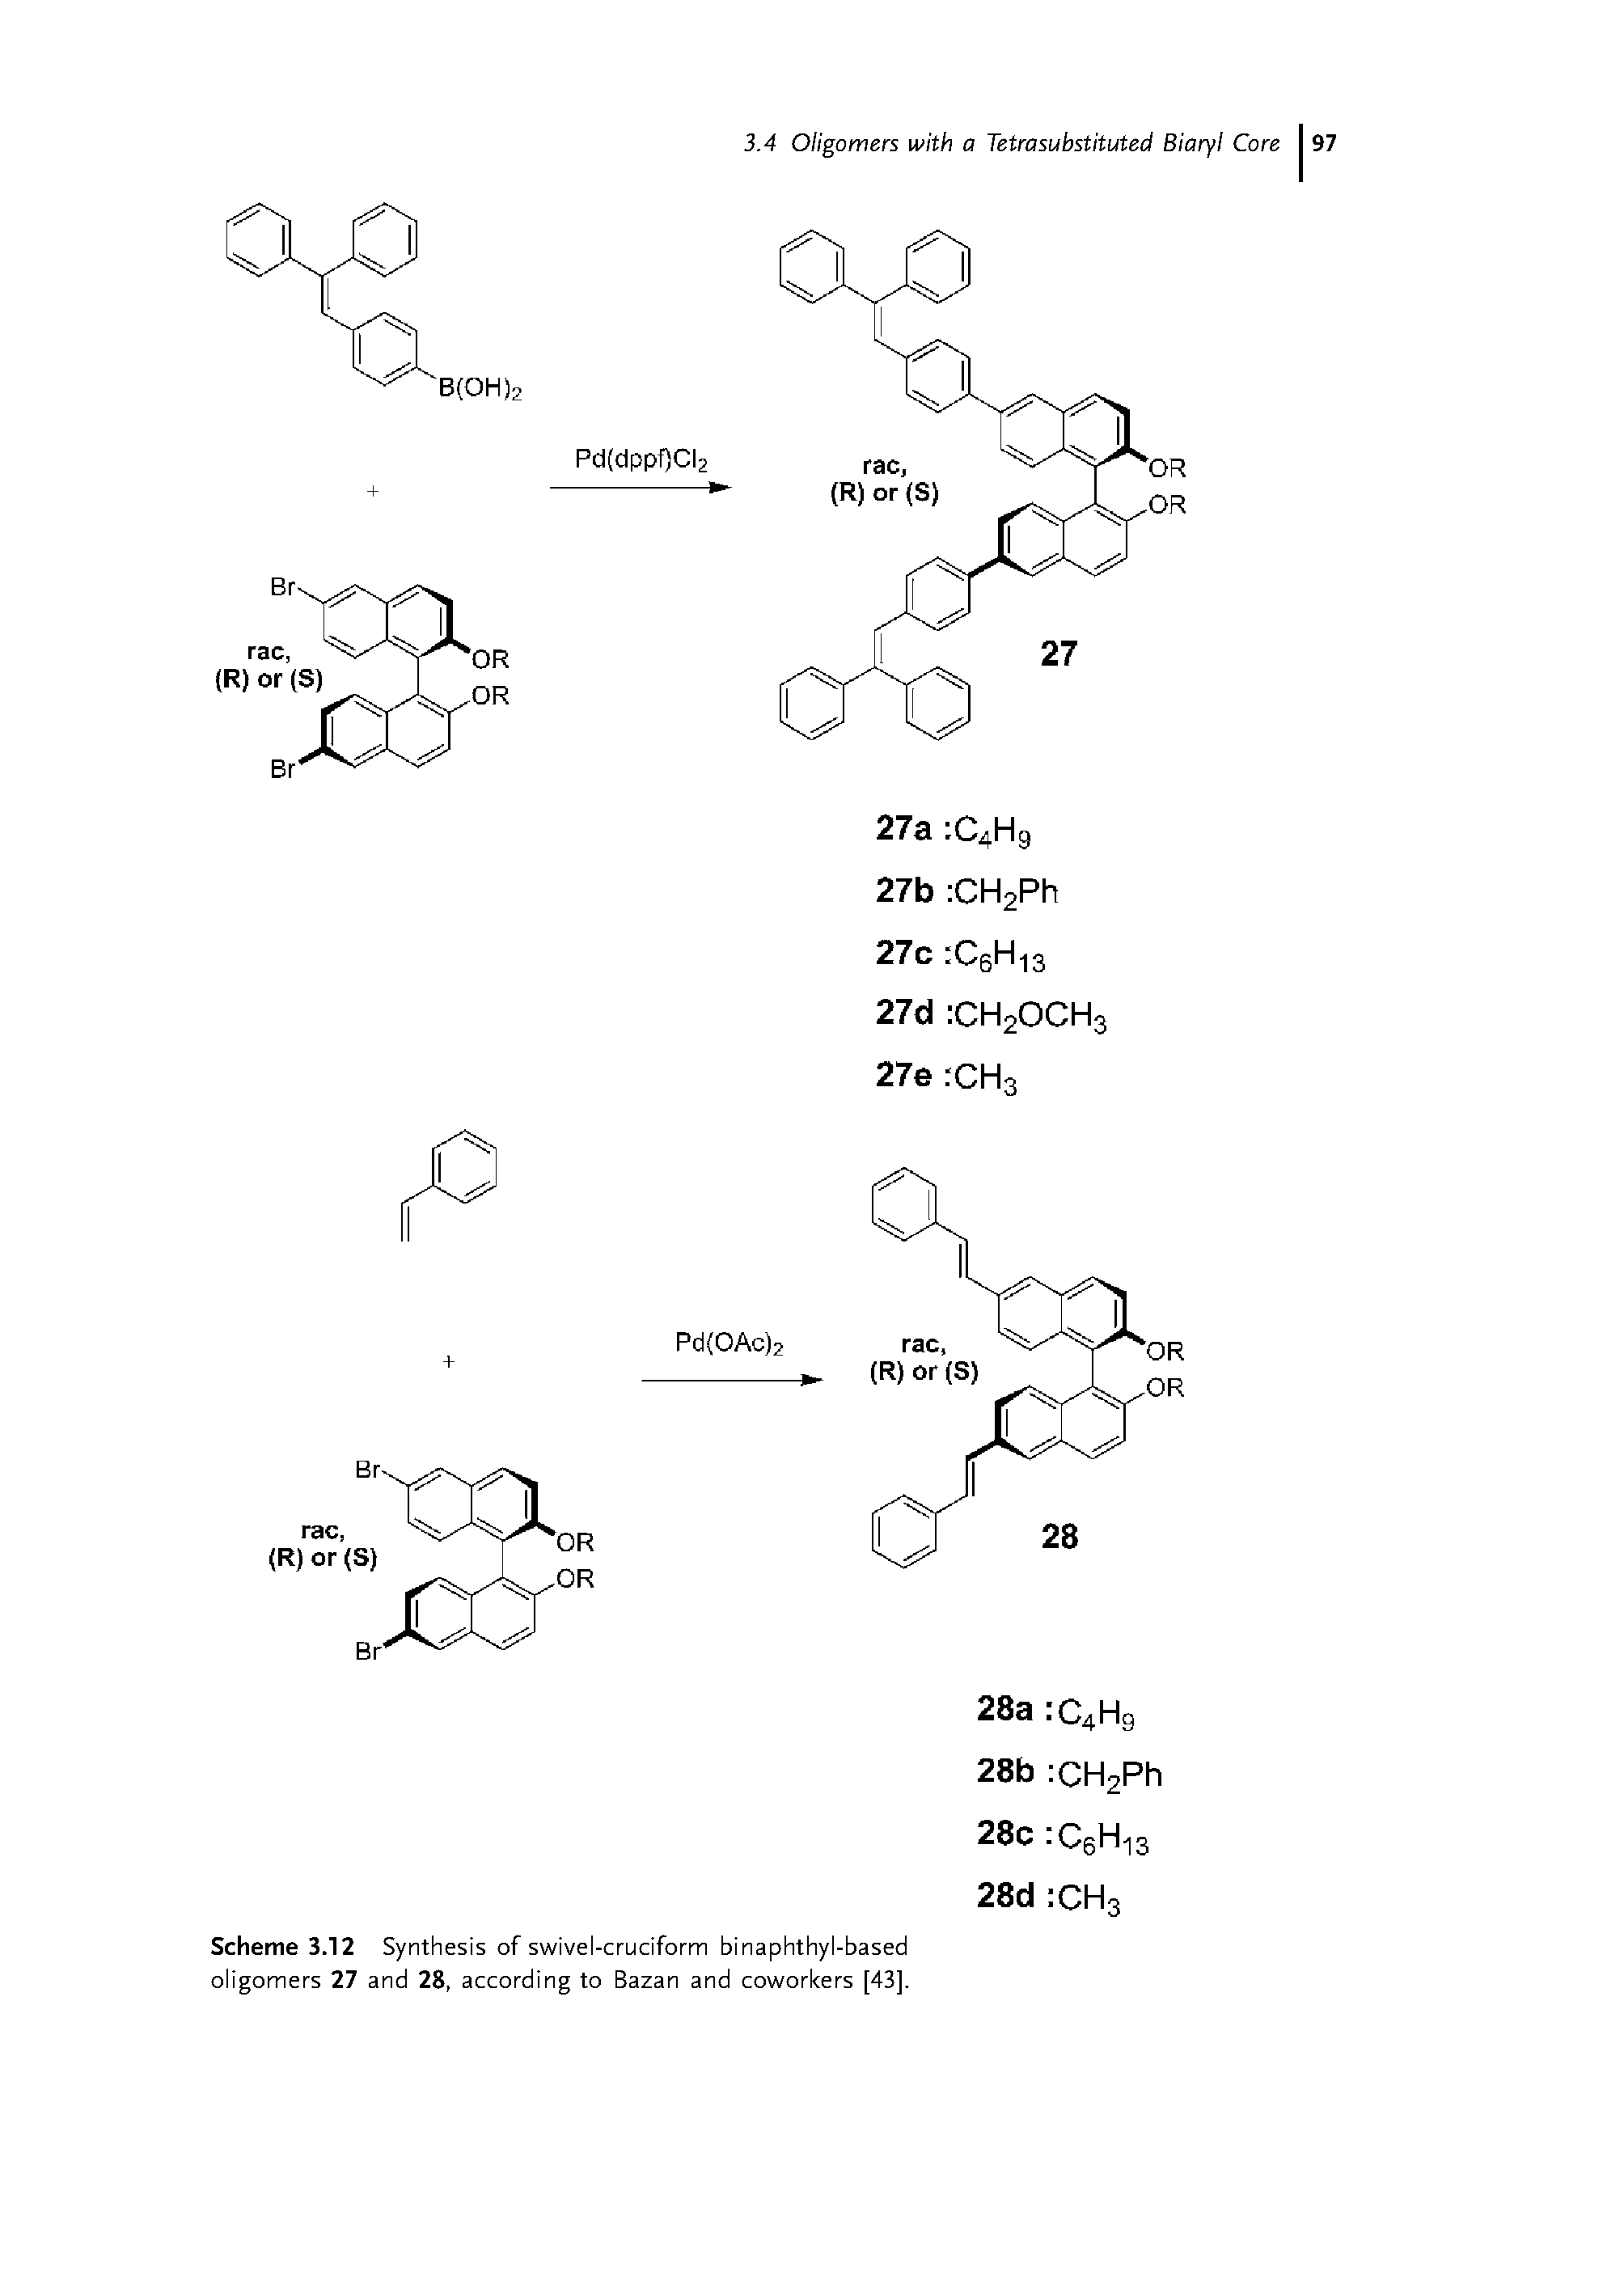 Scheme 3.12 Synthesis of swivel-cruciform binaphthyl-based oligomers 27 and 28, according to Bazan and coworkers [43].